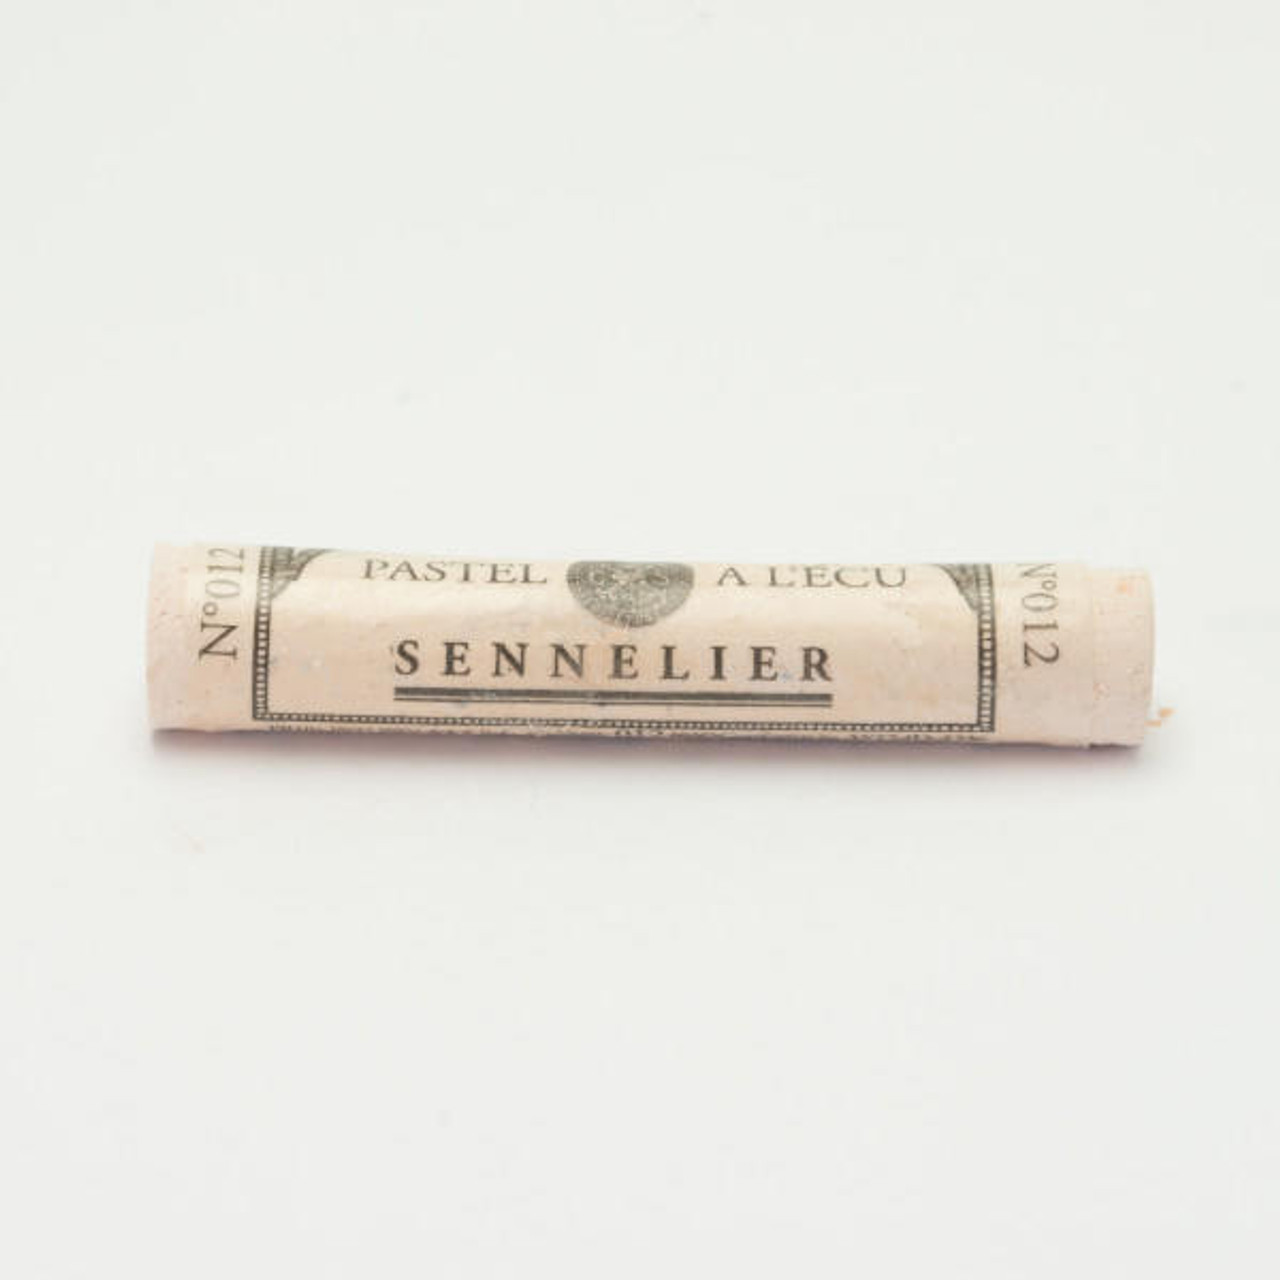 Review: Sennelier Extra Soft Pastels and Sennelier Soft Pastel Card